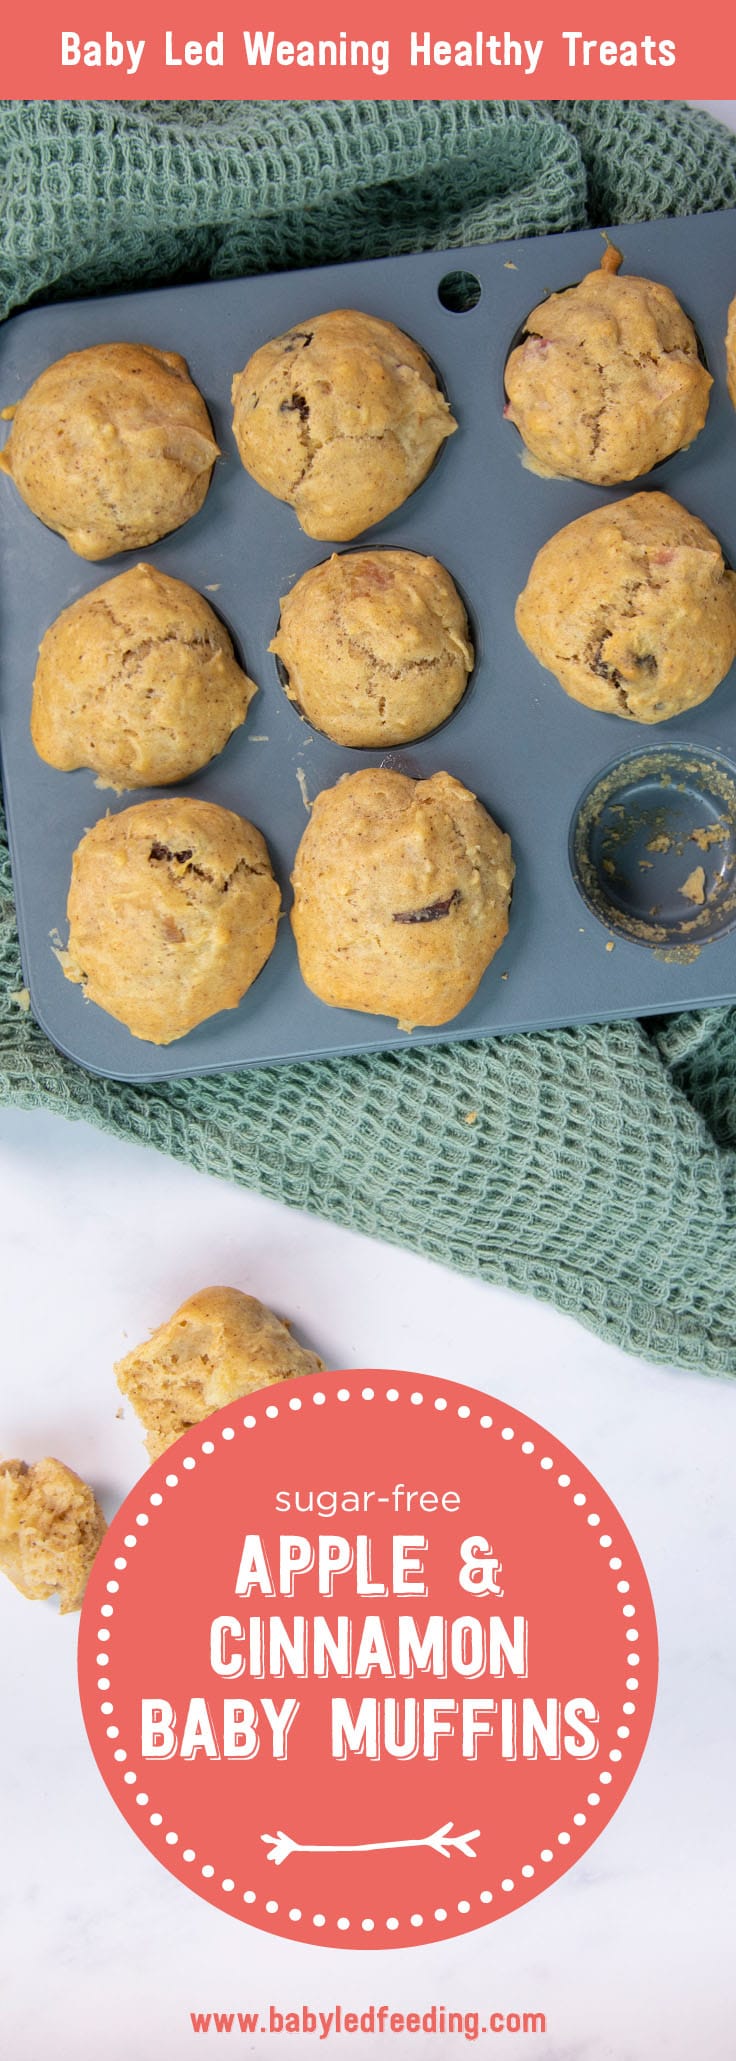 Healthy sugar free mini muffins for baby led weaning breakfast! Loaded with sweet fiber rich apples and plump raisins with a hint of cinnamon, this easy healthy finger food is sure to win over even the most picky toddlers and babies! #minimuffins #babyledweaning #babyledfeeding #breakfast #sugarfree